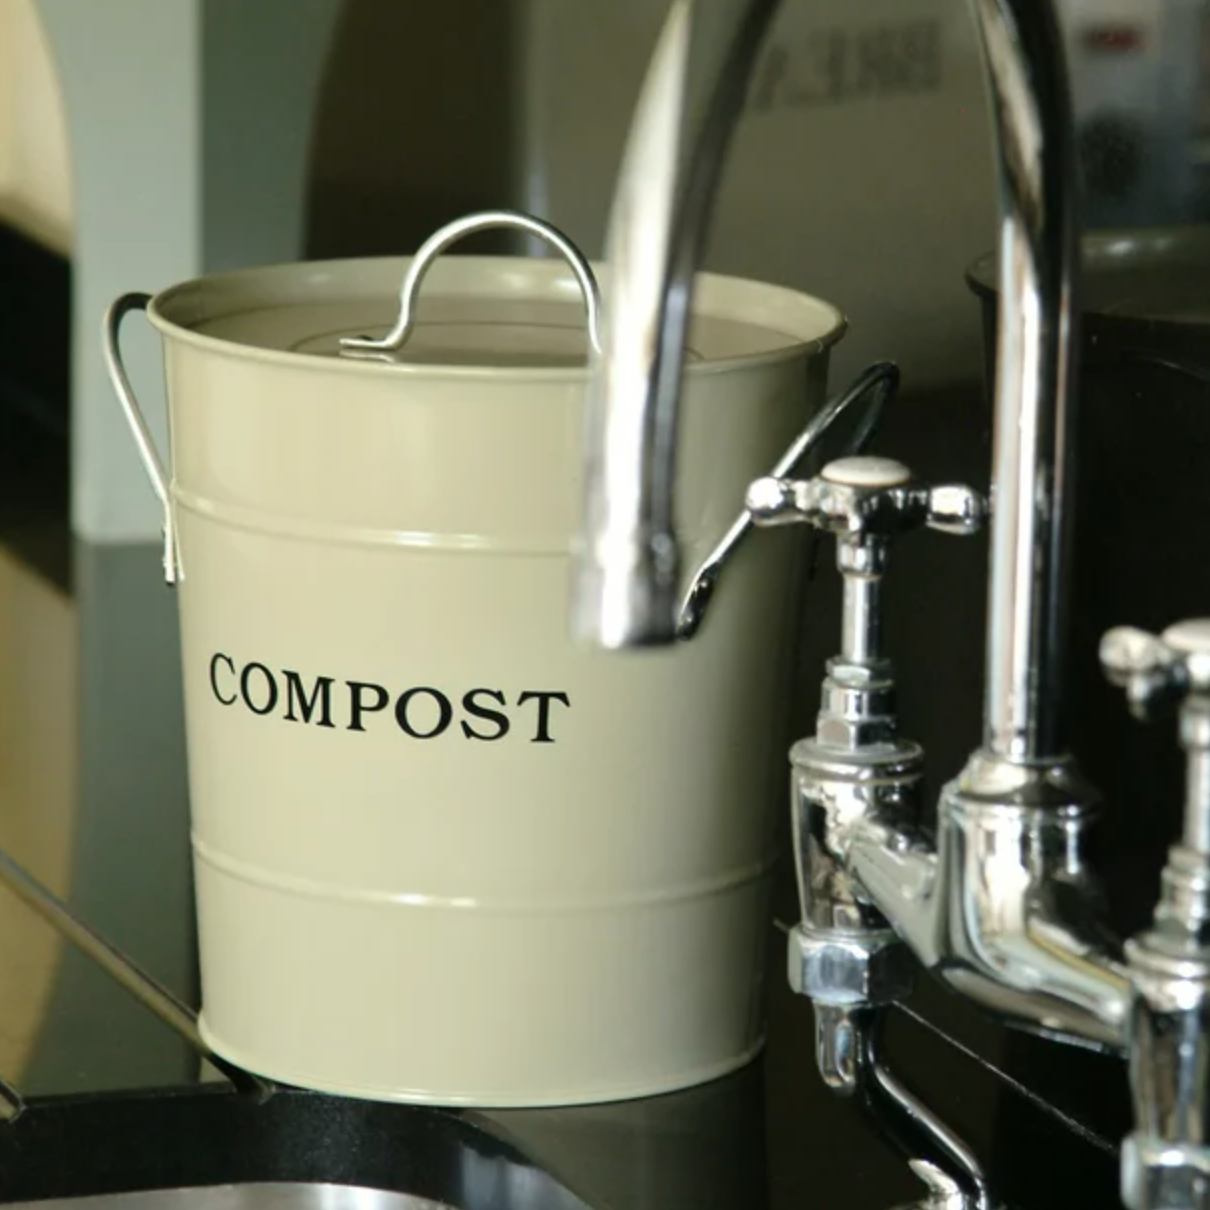 the ivory compost bin on a counter next to a sink